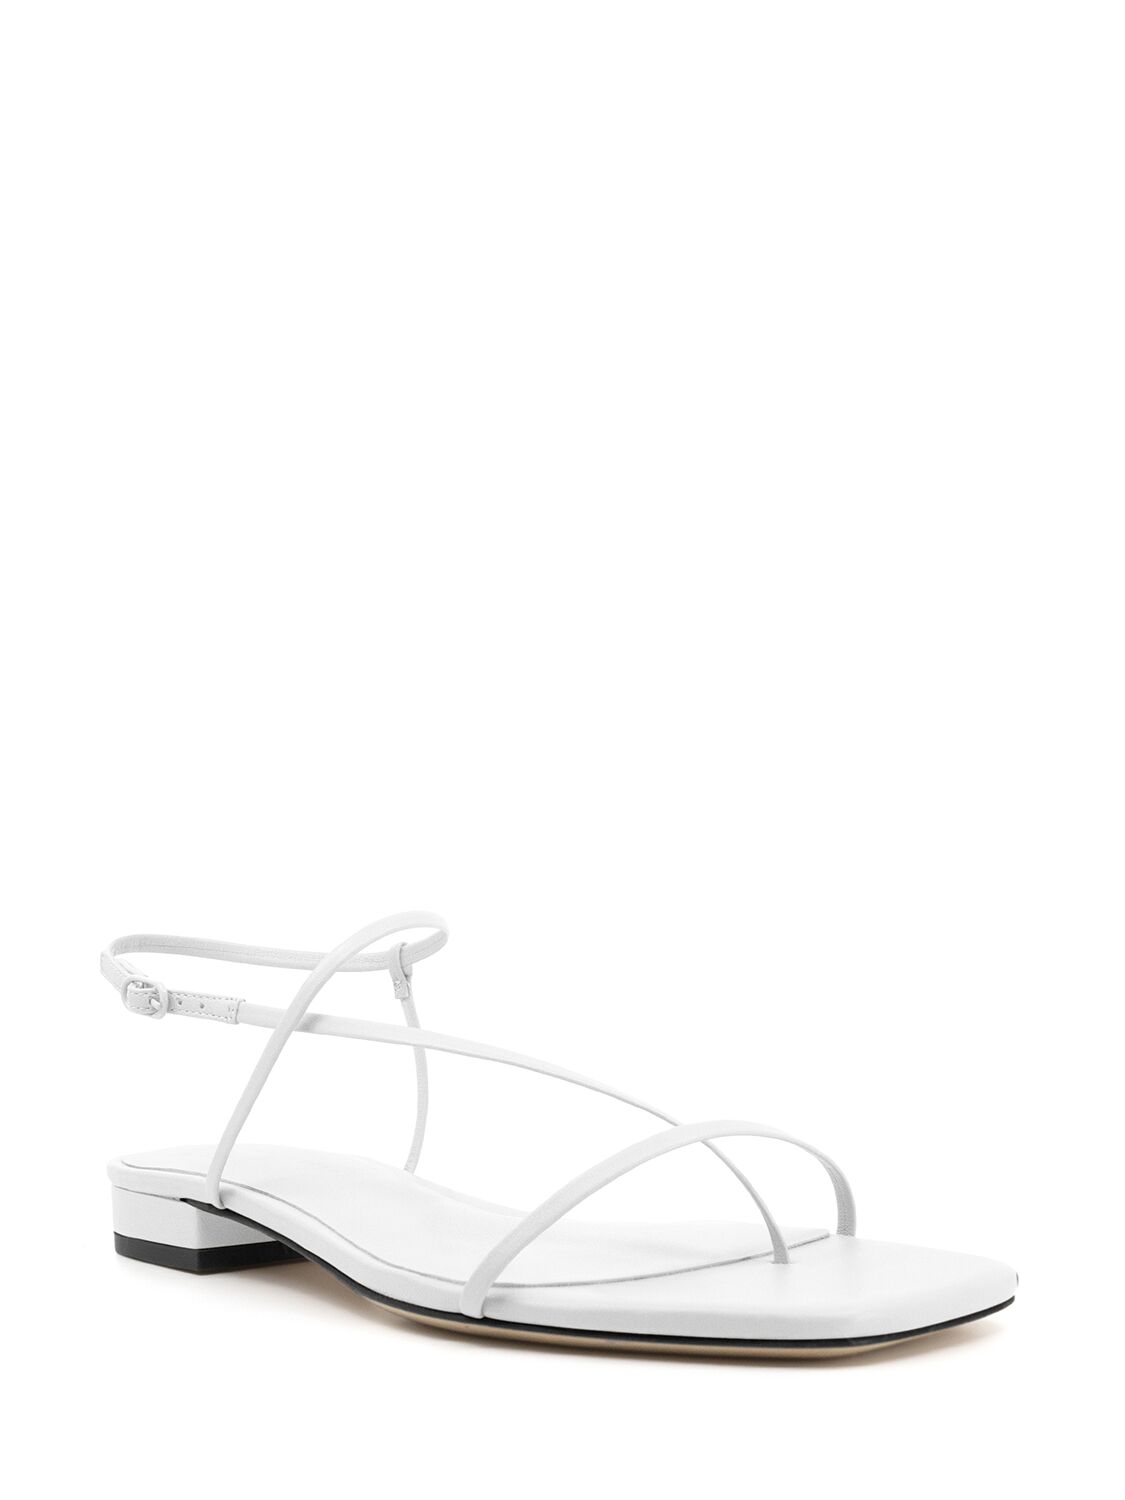 Shop Studio Amelia 10mm Cross Front Leather Flats In White